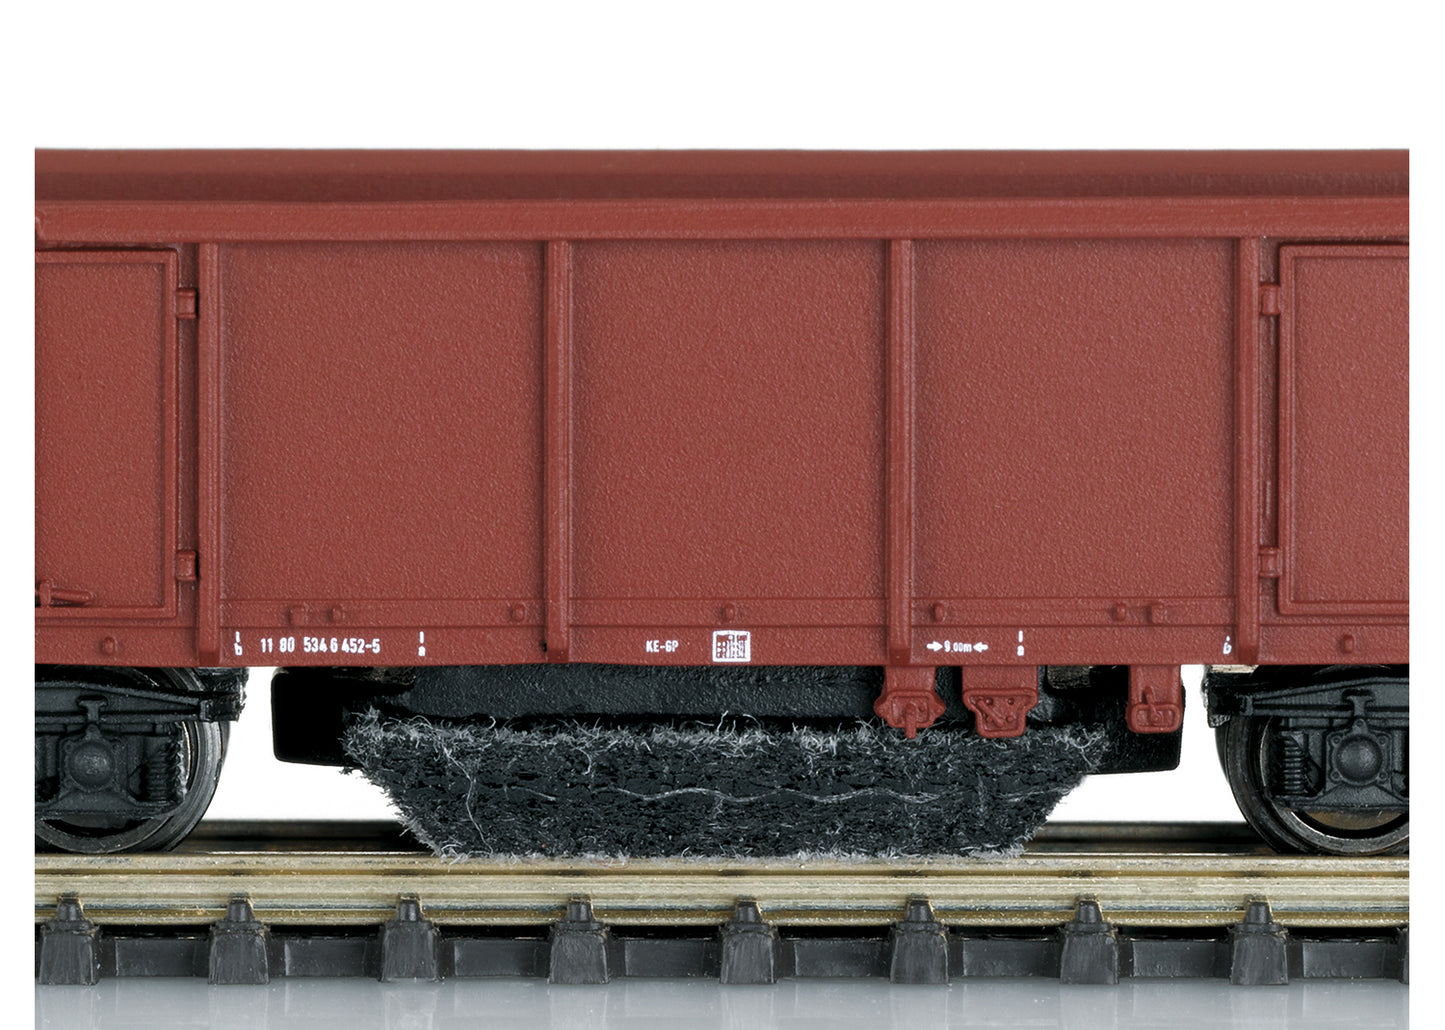 Marklin 86501 - Track Cleaning Car (brown version)